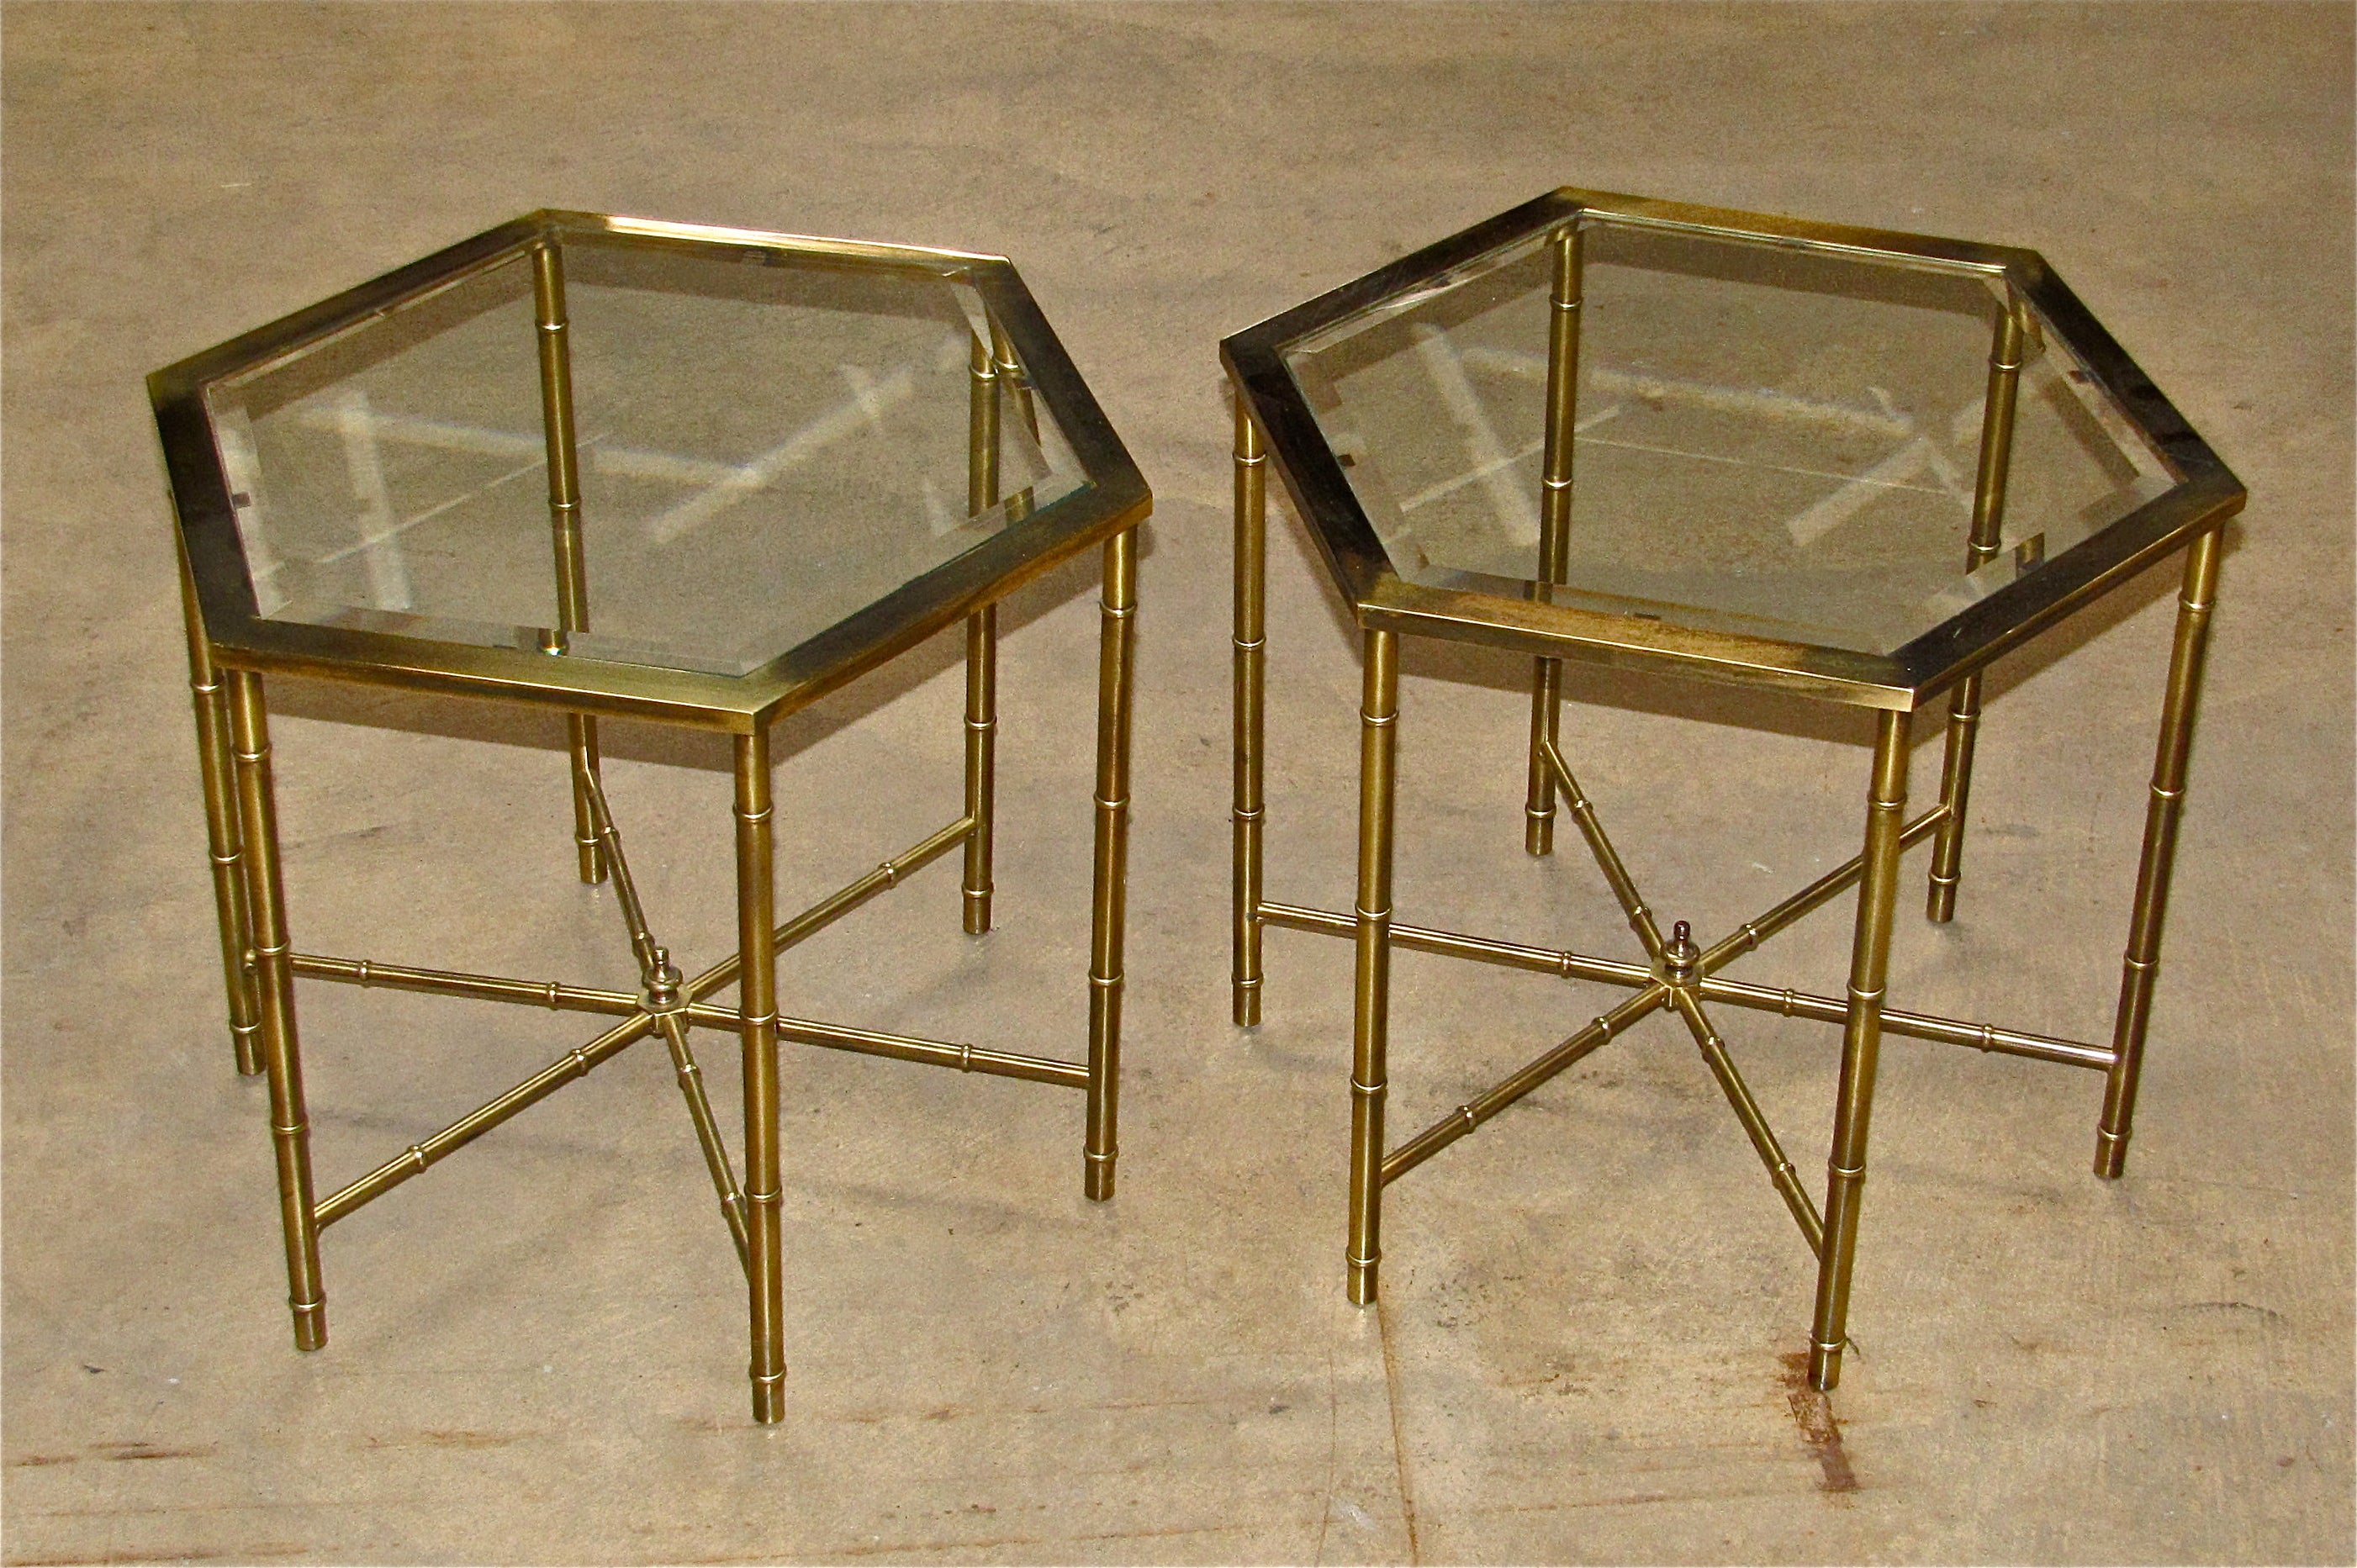 Pair Mastercraft Faux Bamboo Brass Side End Tables